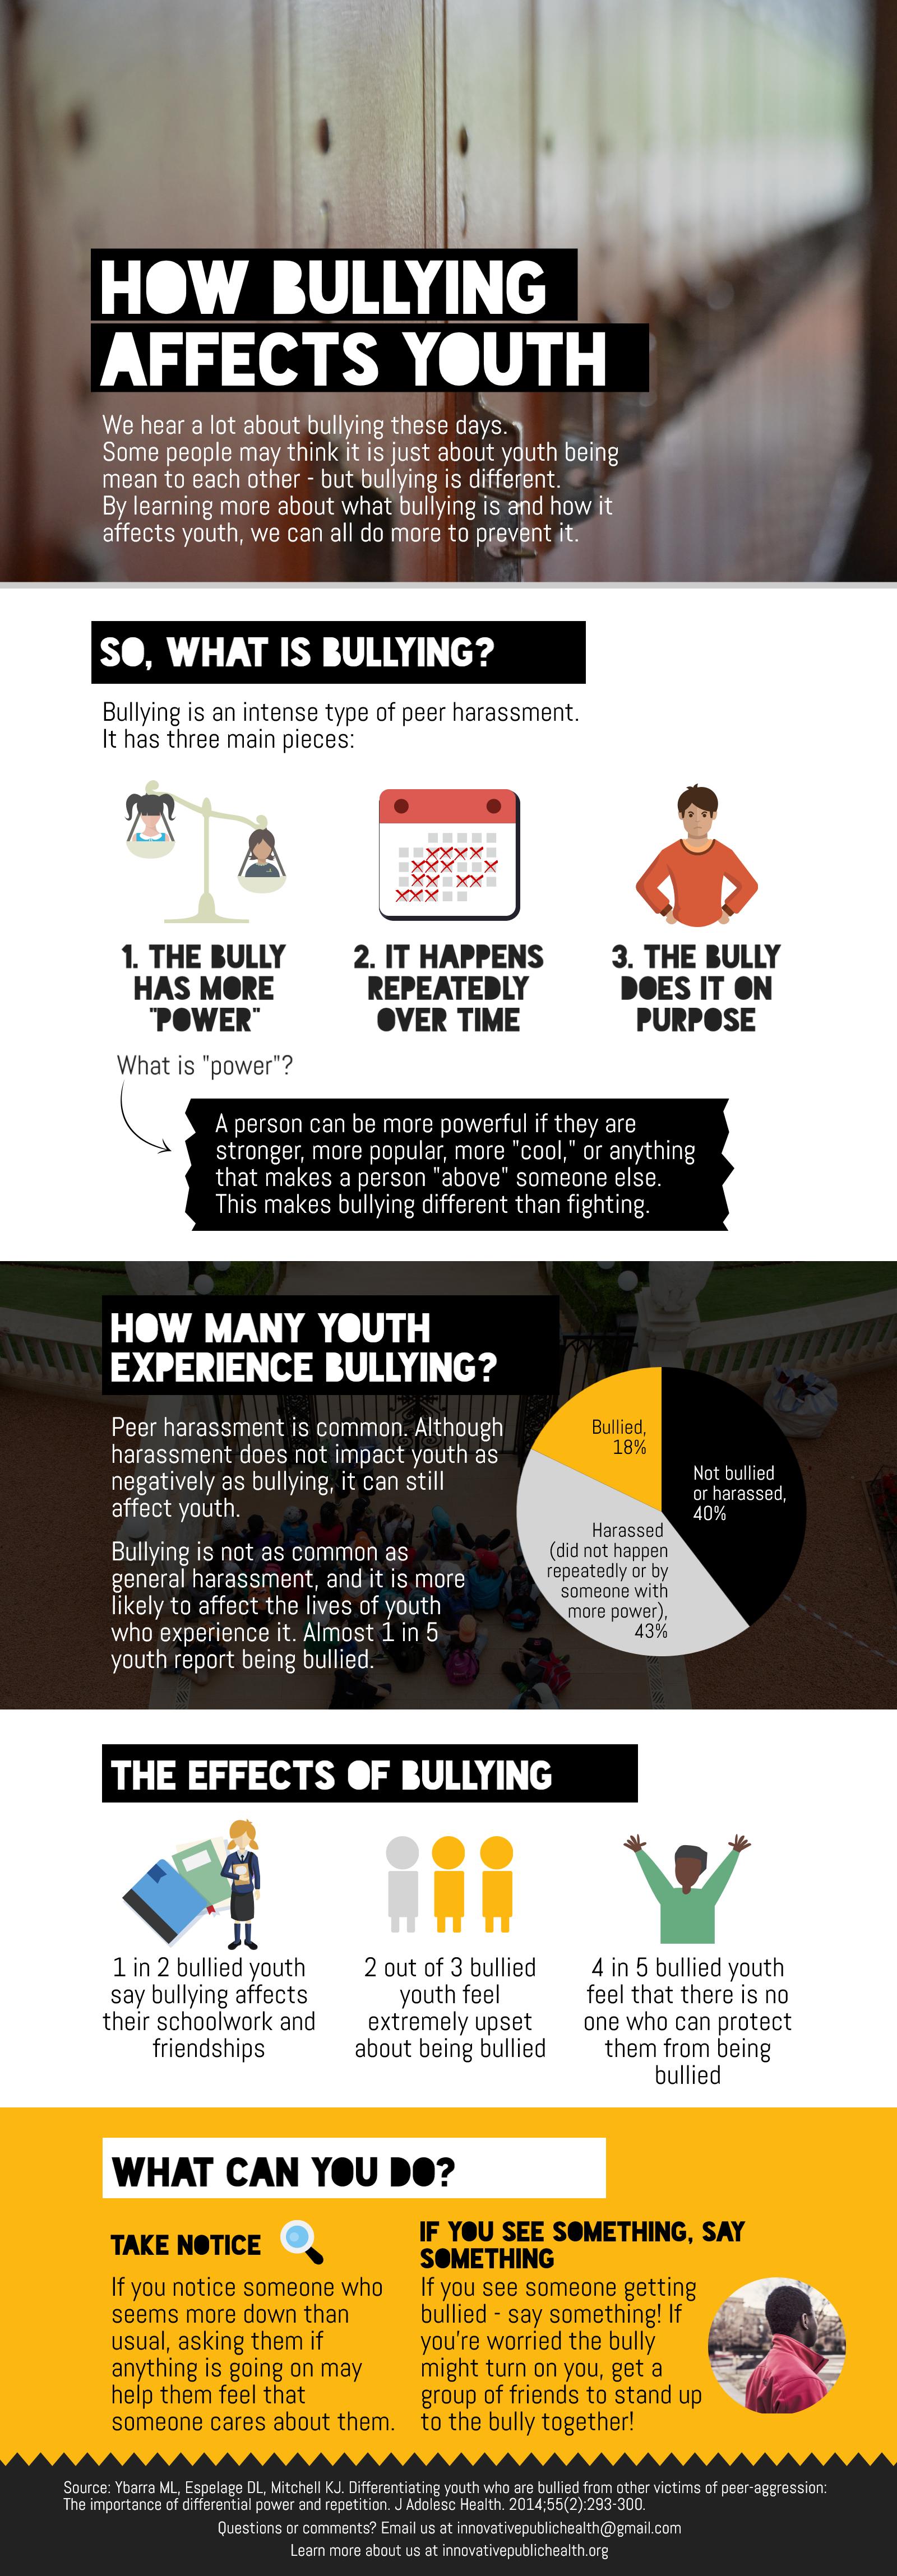 research gap about bullying